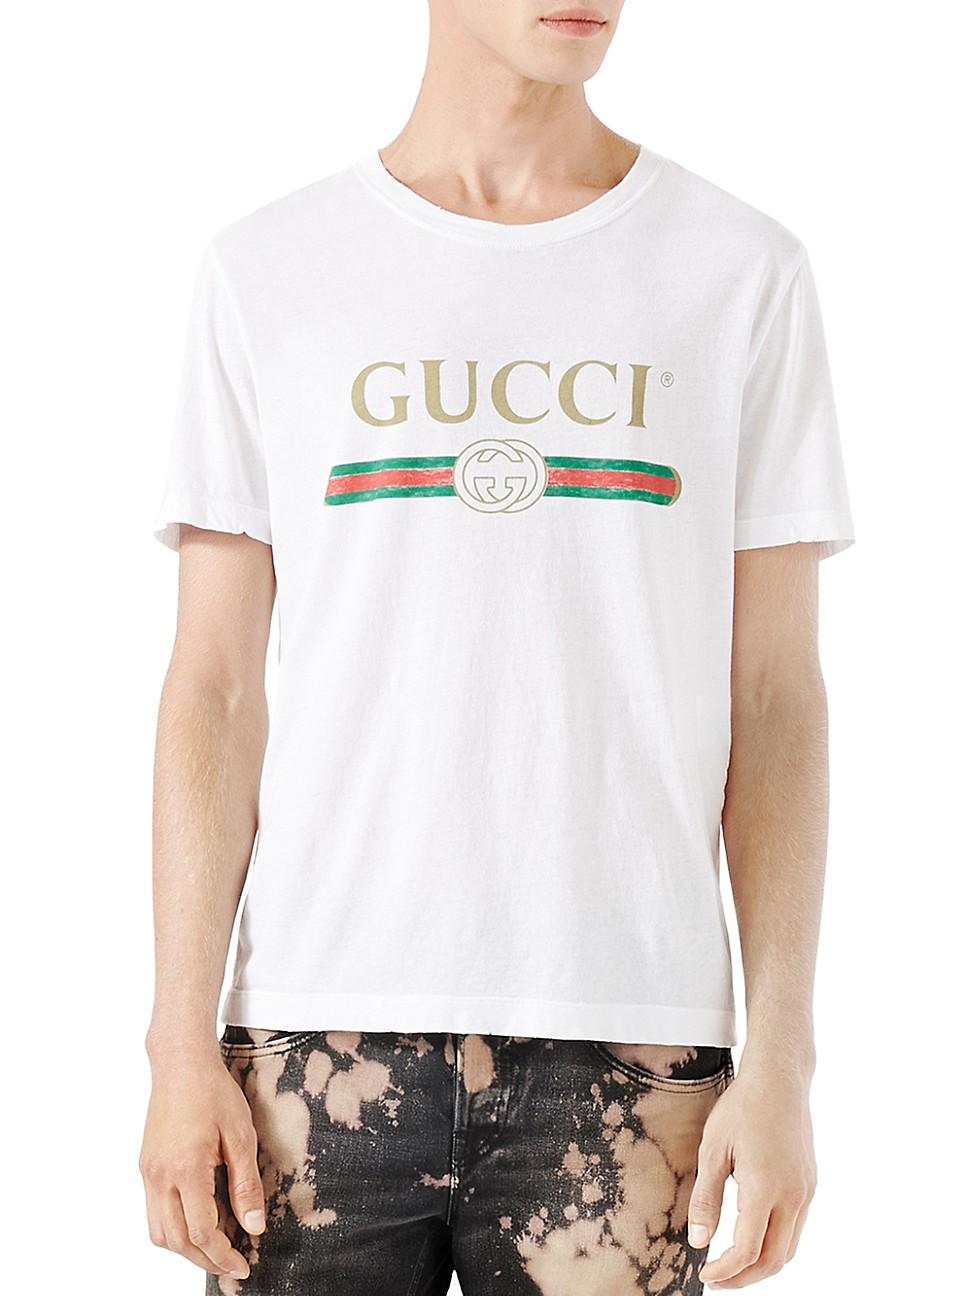 Gucci Cotton White Classic Logo T-shirt for Men - Save 69% - Lyst